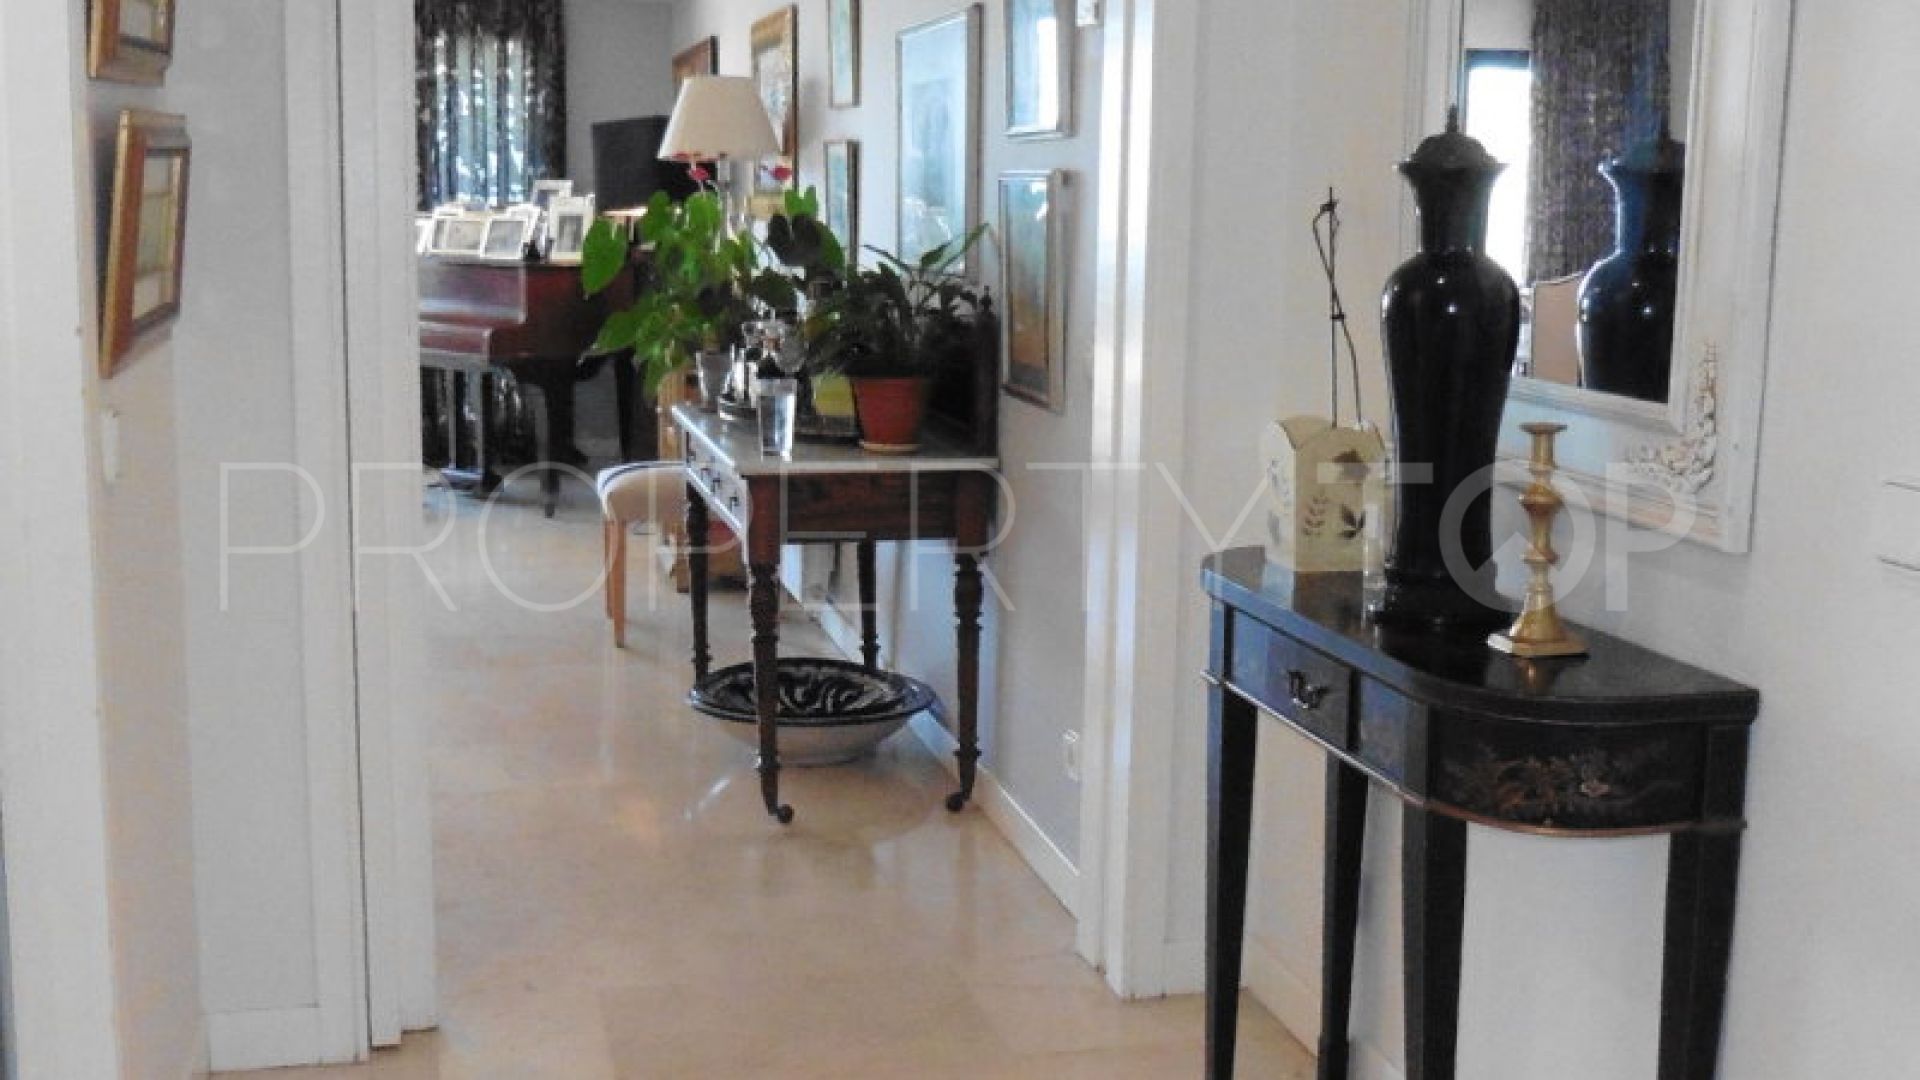 5 bedrooms ground floor apartment in Paseo del Río for sale